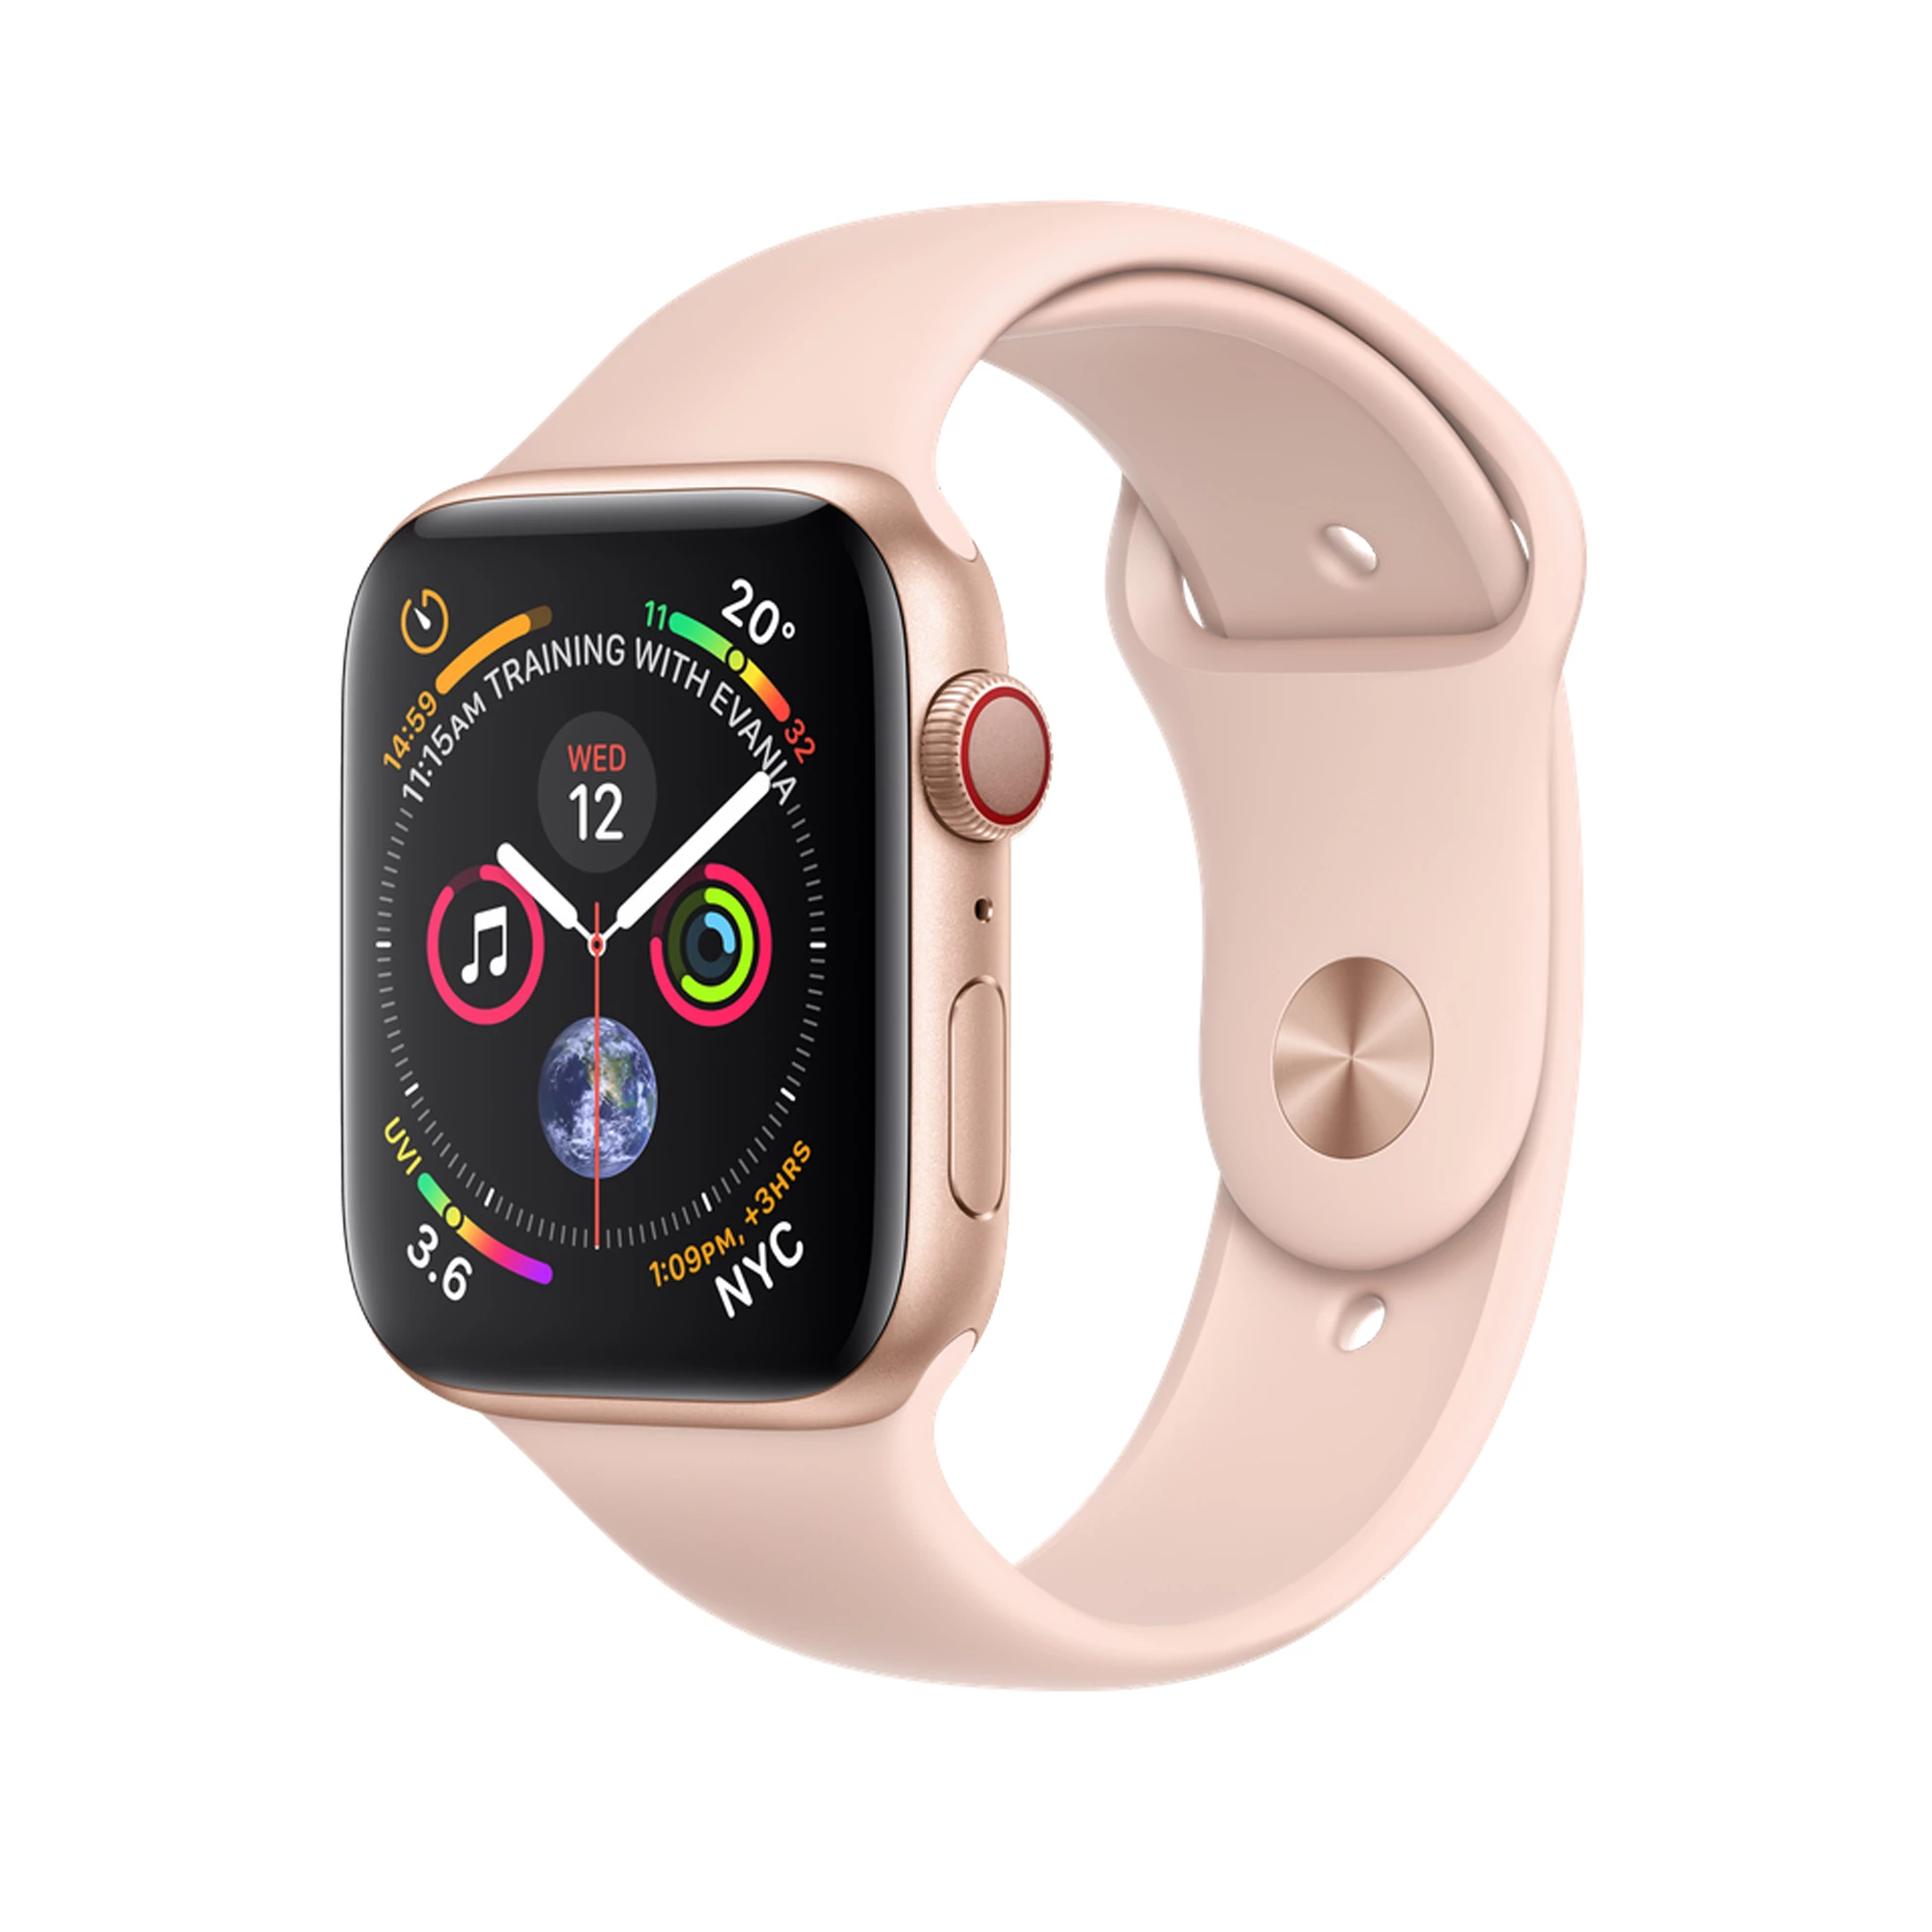 Apple Watch Series 4 (GPS + Cellular) 40mm Gold Aluminum Case with Pink Sand Sport Band (MTUJ2, MTVG2)